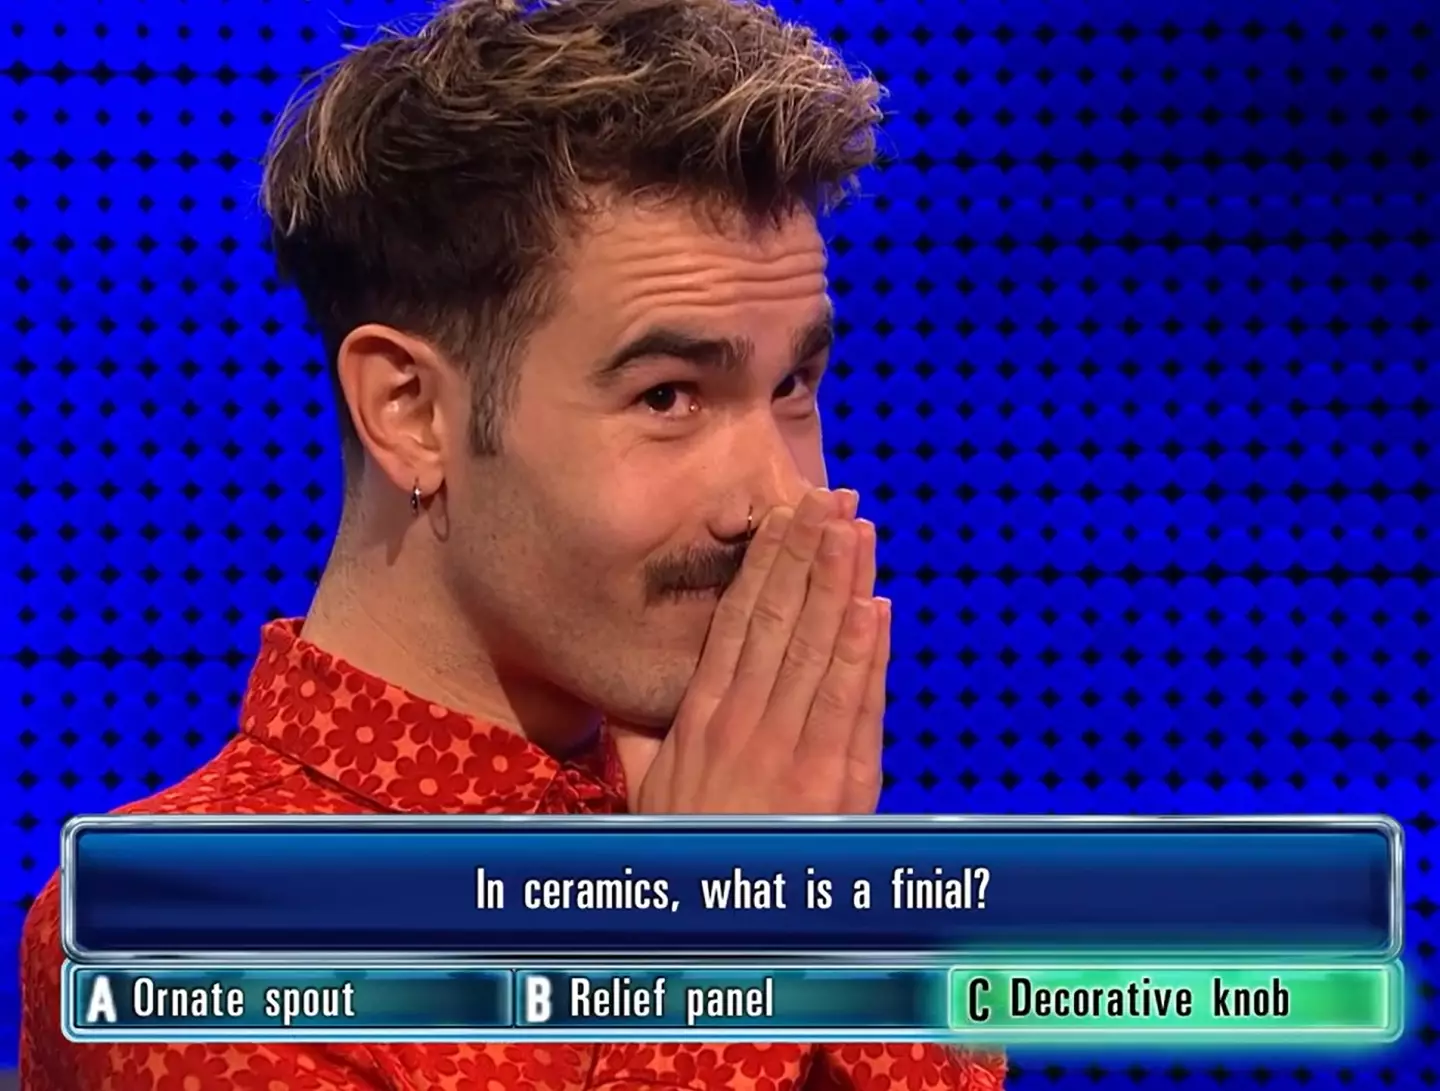 When you don't know the answer just pick the funniest one, it worked for Reece.